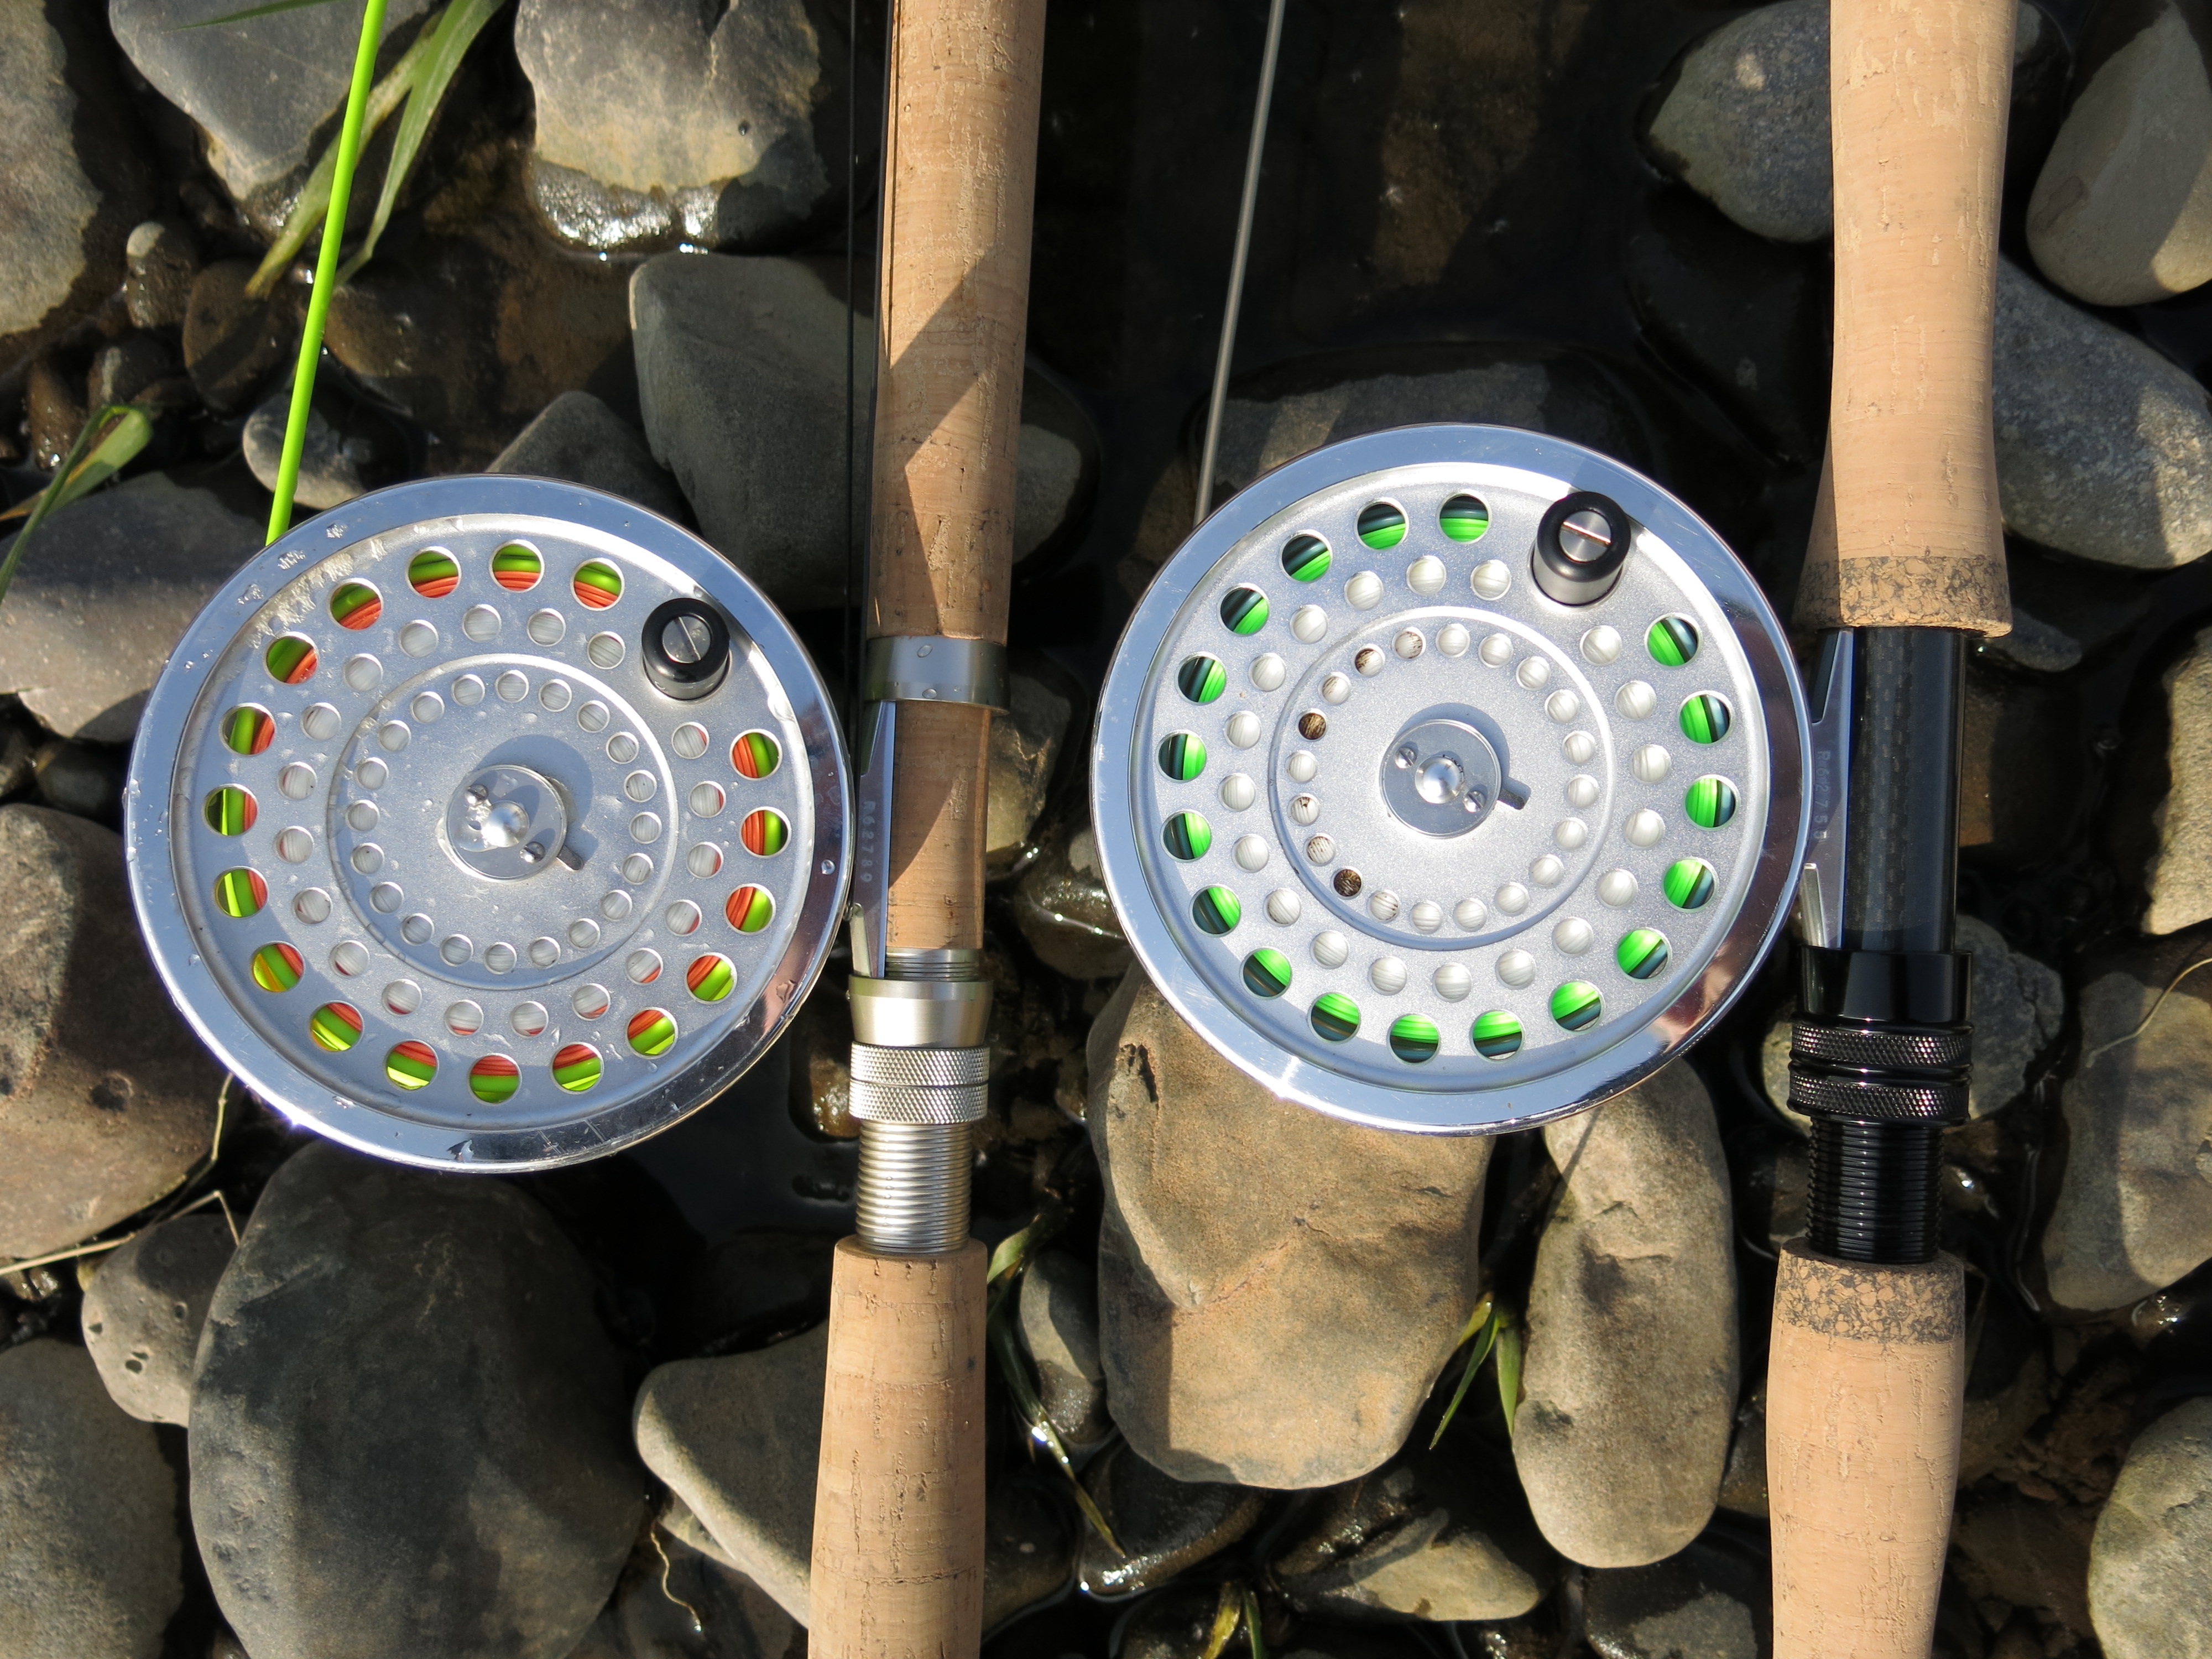 Odd question; Can you use a spey rod with a centerpin reel?